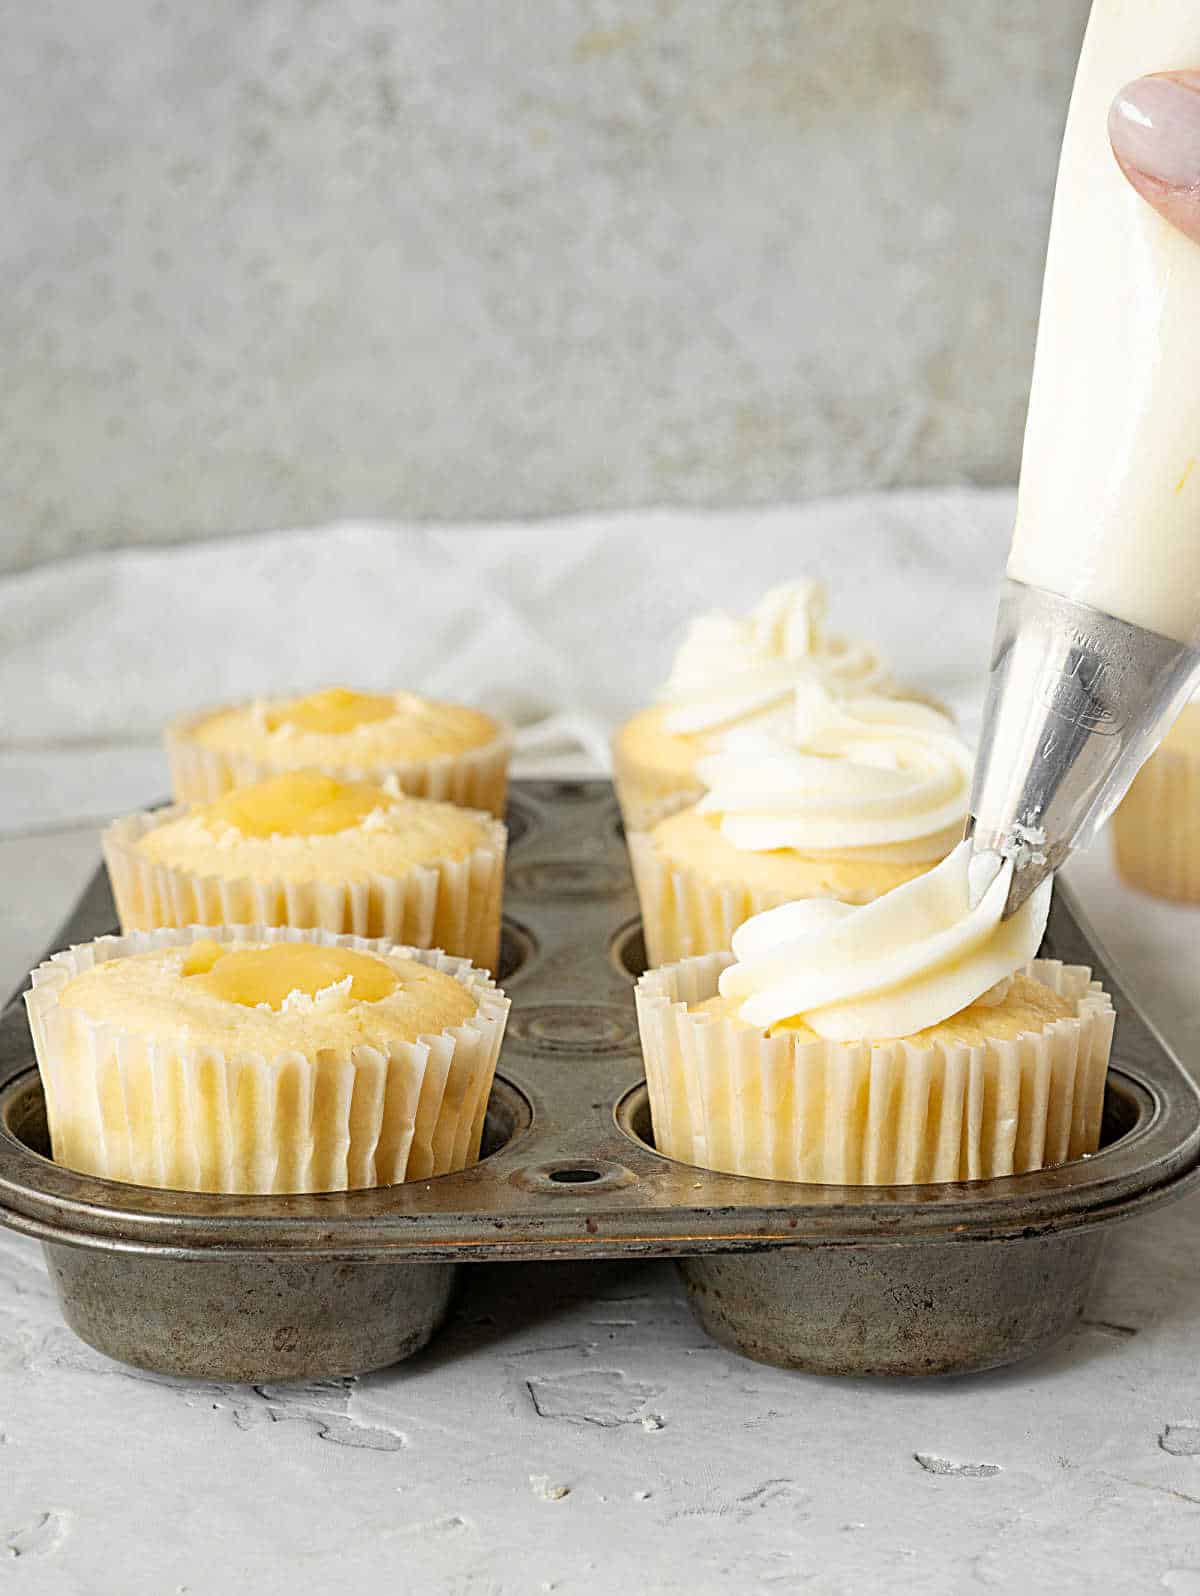 Piping lemon frosting on top of curd filled cupcakes in a metal tin. Grey surface and background.